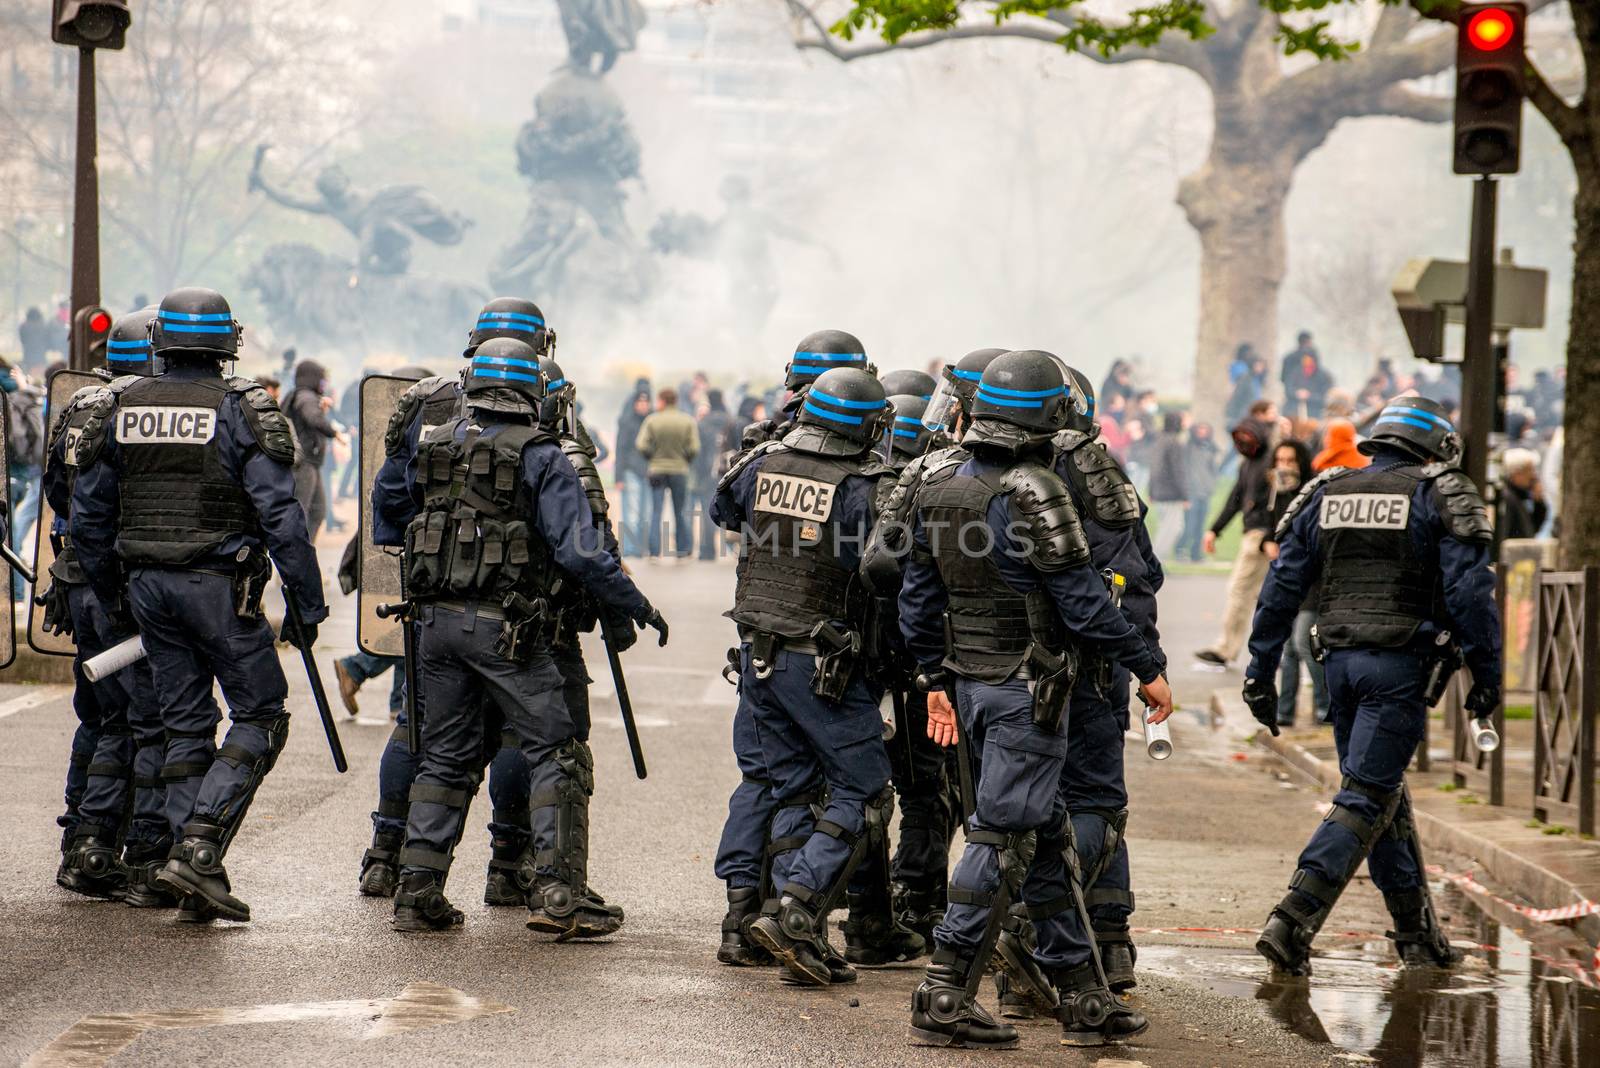 FRANCE, Paris: Riot policemen stand in line in front of violent protesters during a demo on April 9, 2016 in Paris, against the French government's proposed labour law reforms.